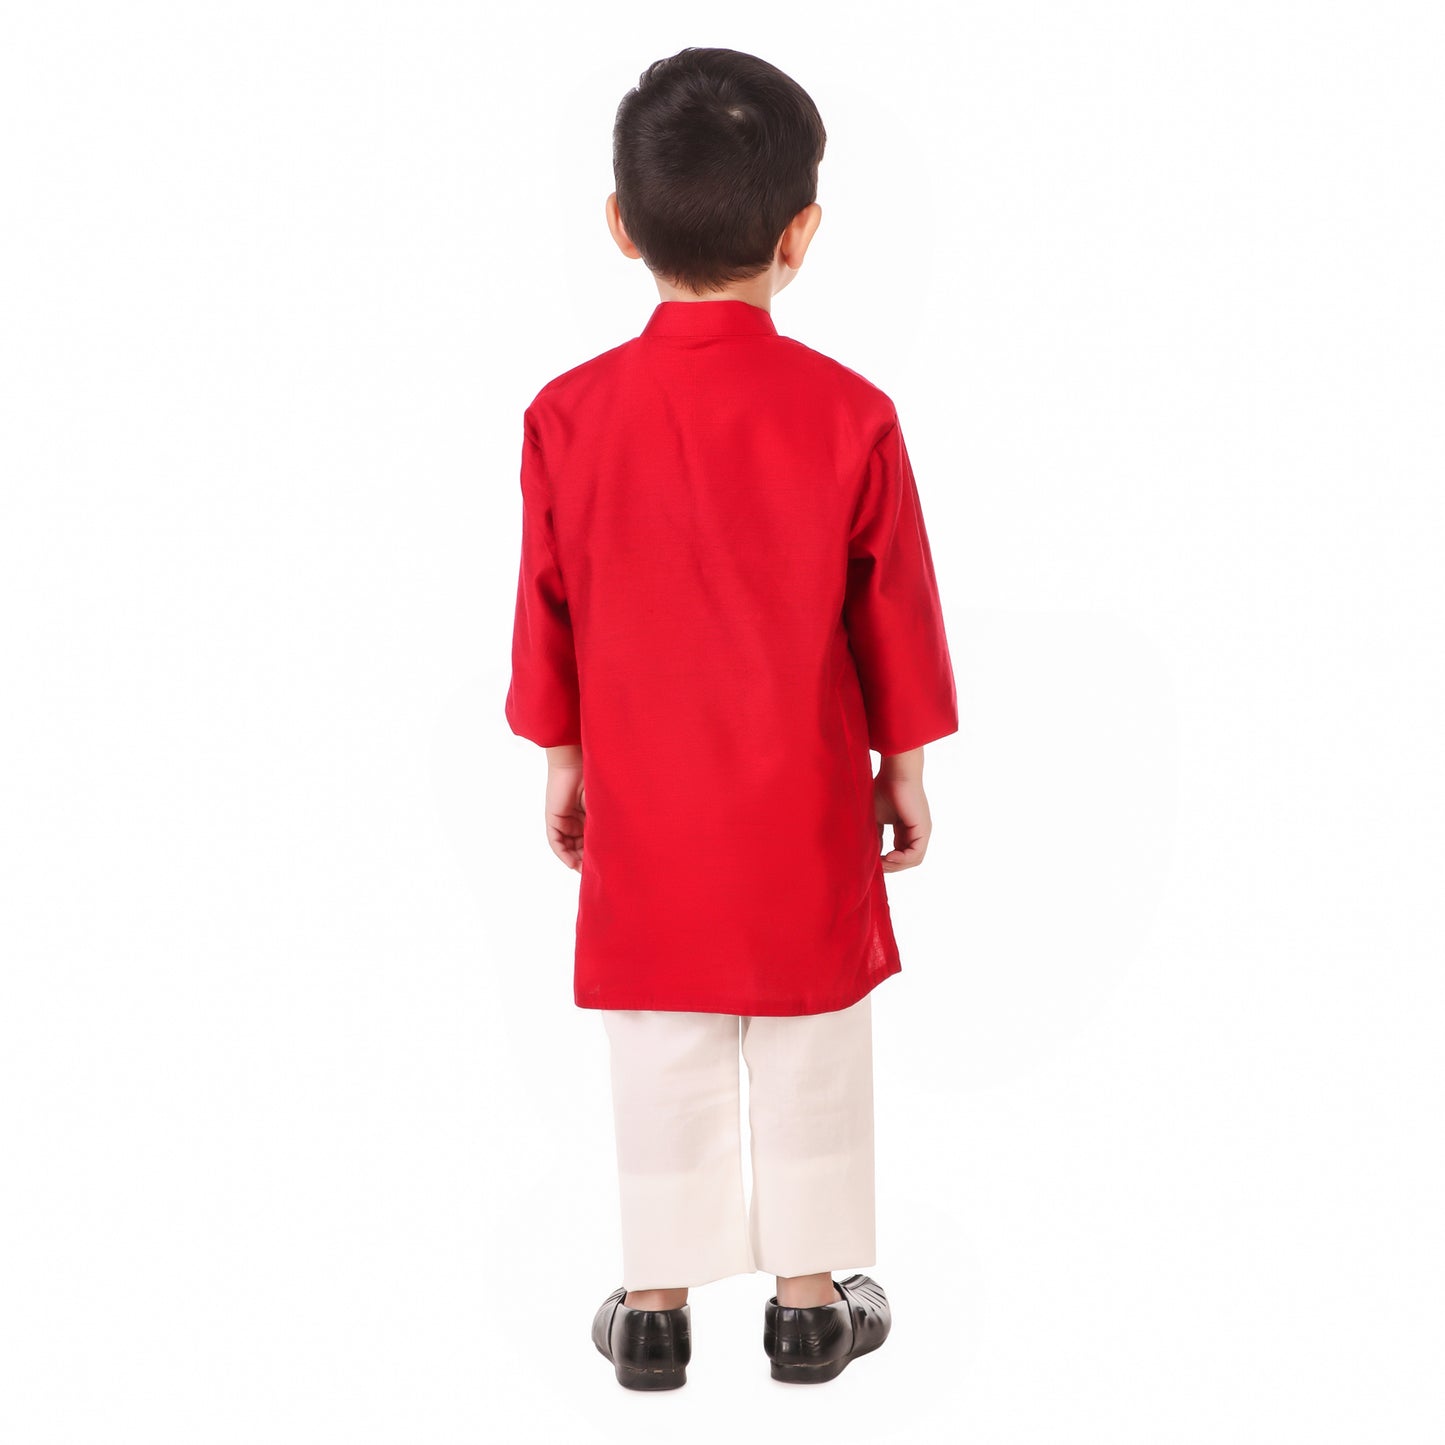 Red Kurta Pajama for Boys, Ages 0-16 Years, Poly Silk (with cotton lining)